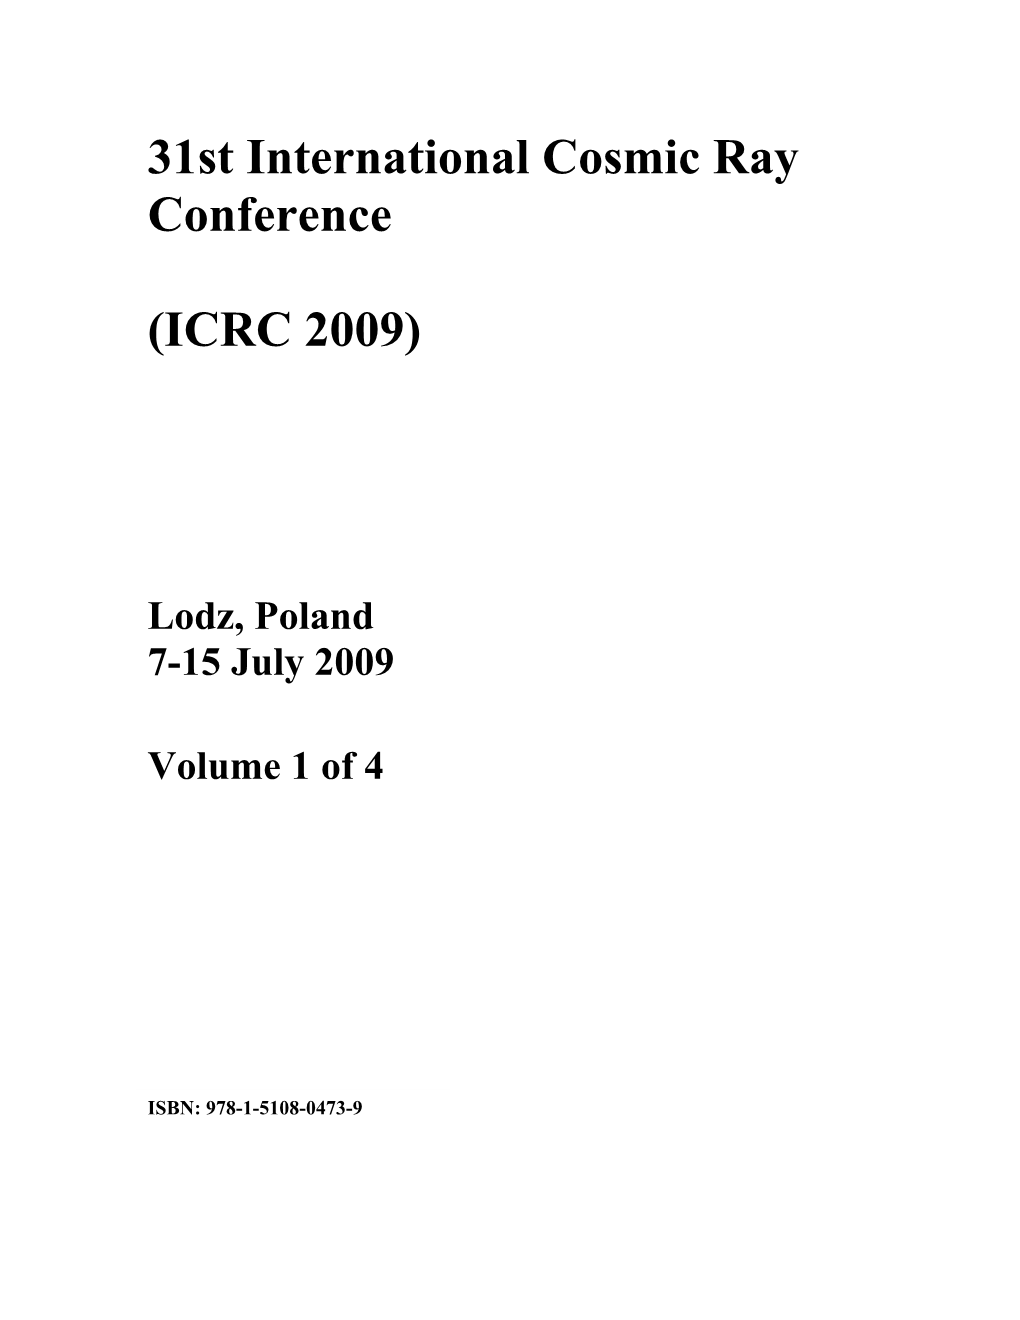 31St International Cosmic Ray Conference (ICRC 2009)